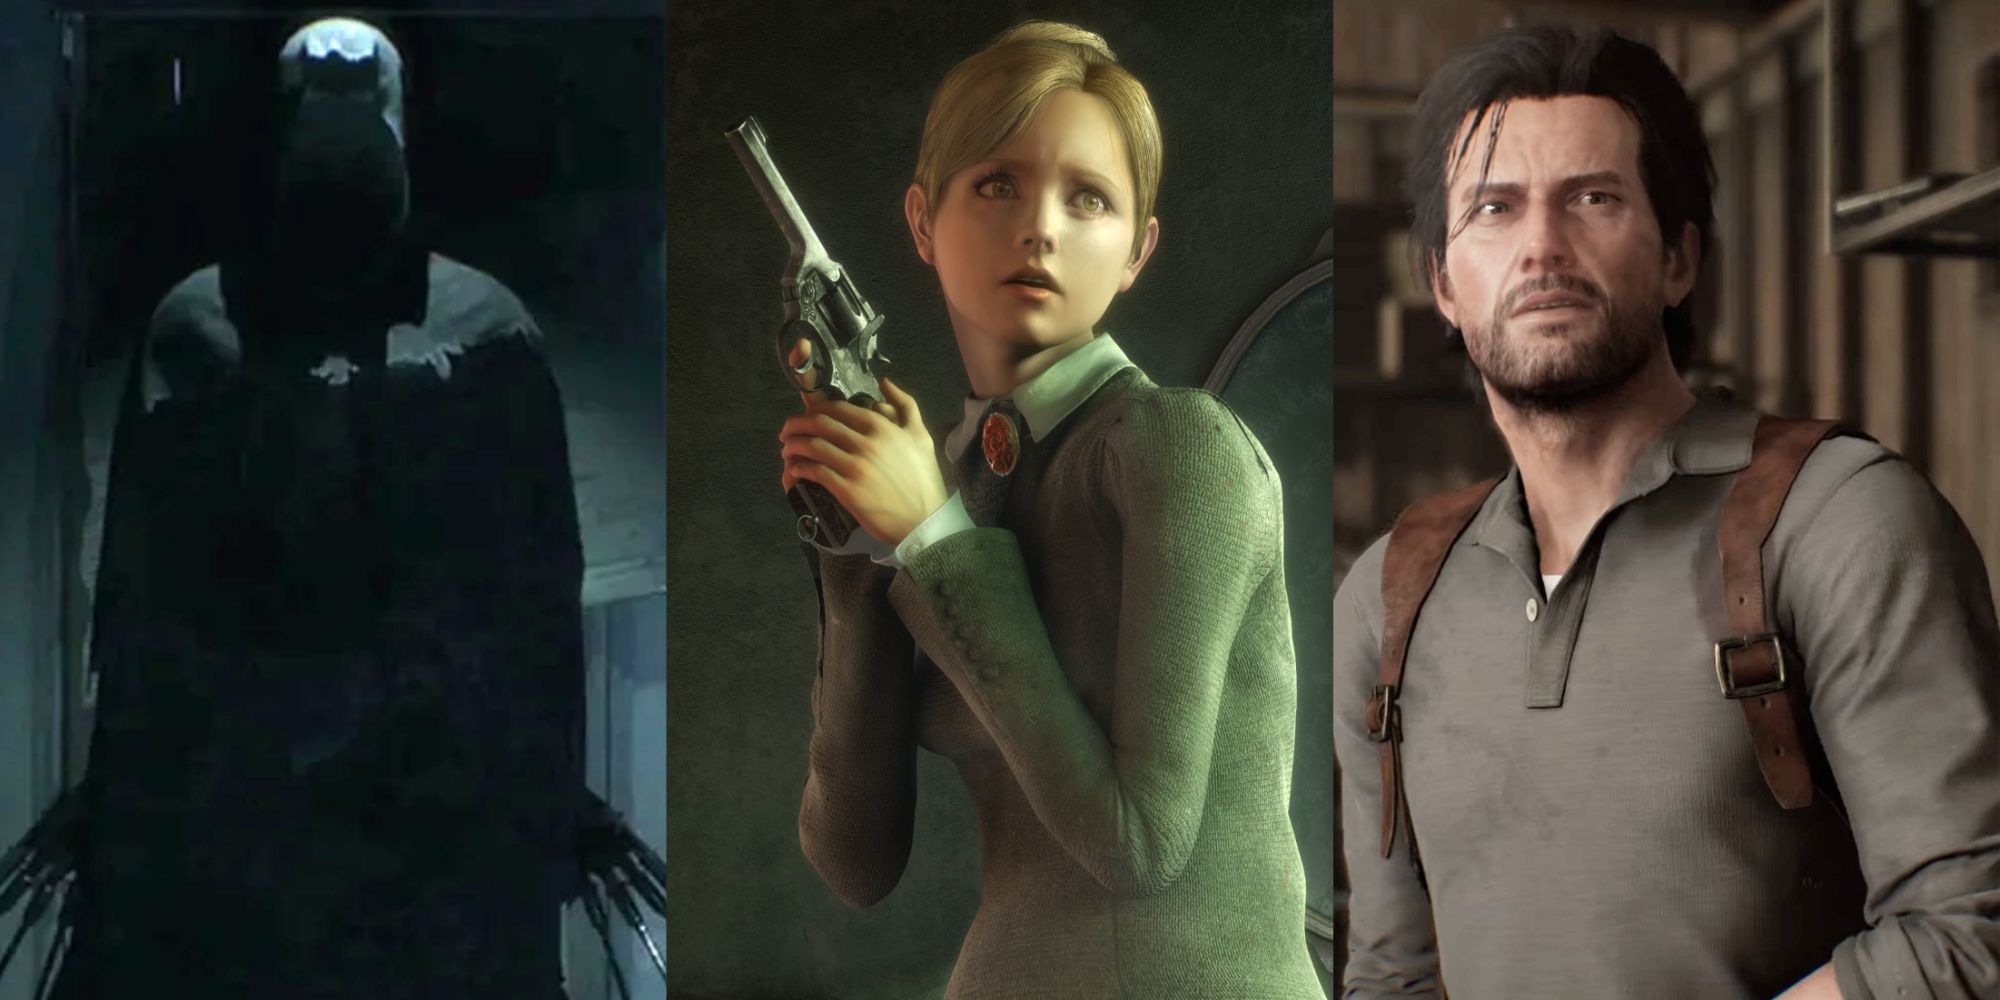 Split image of characters from Visage, Rule Of Rose, and The Evil Within 2